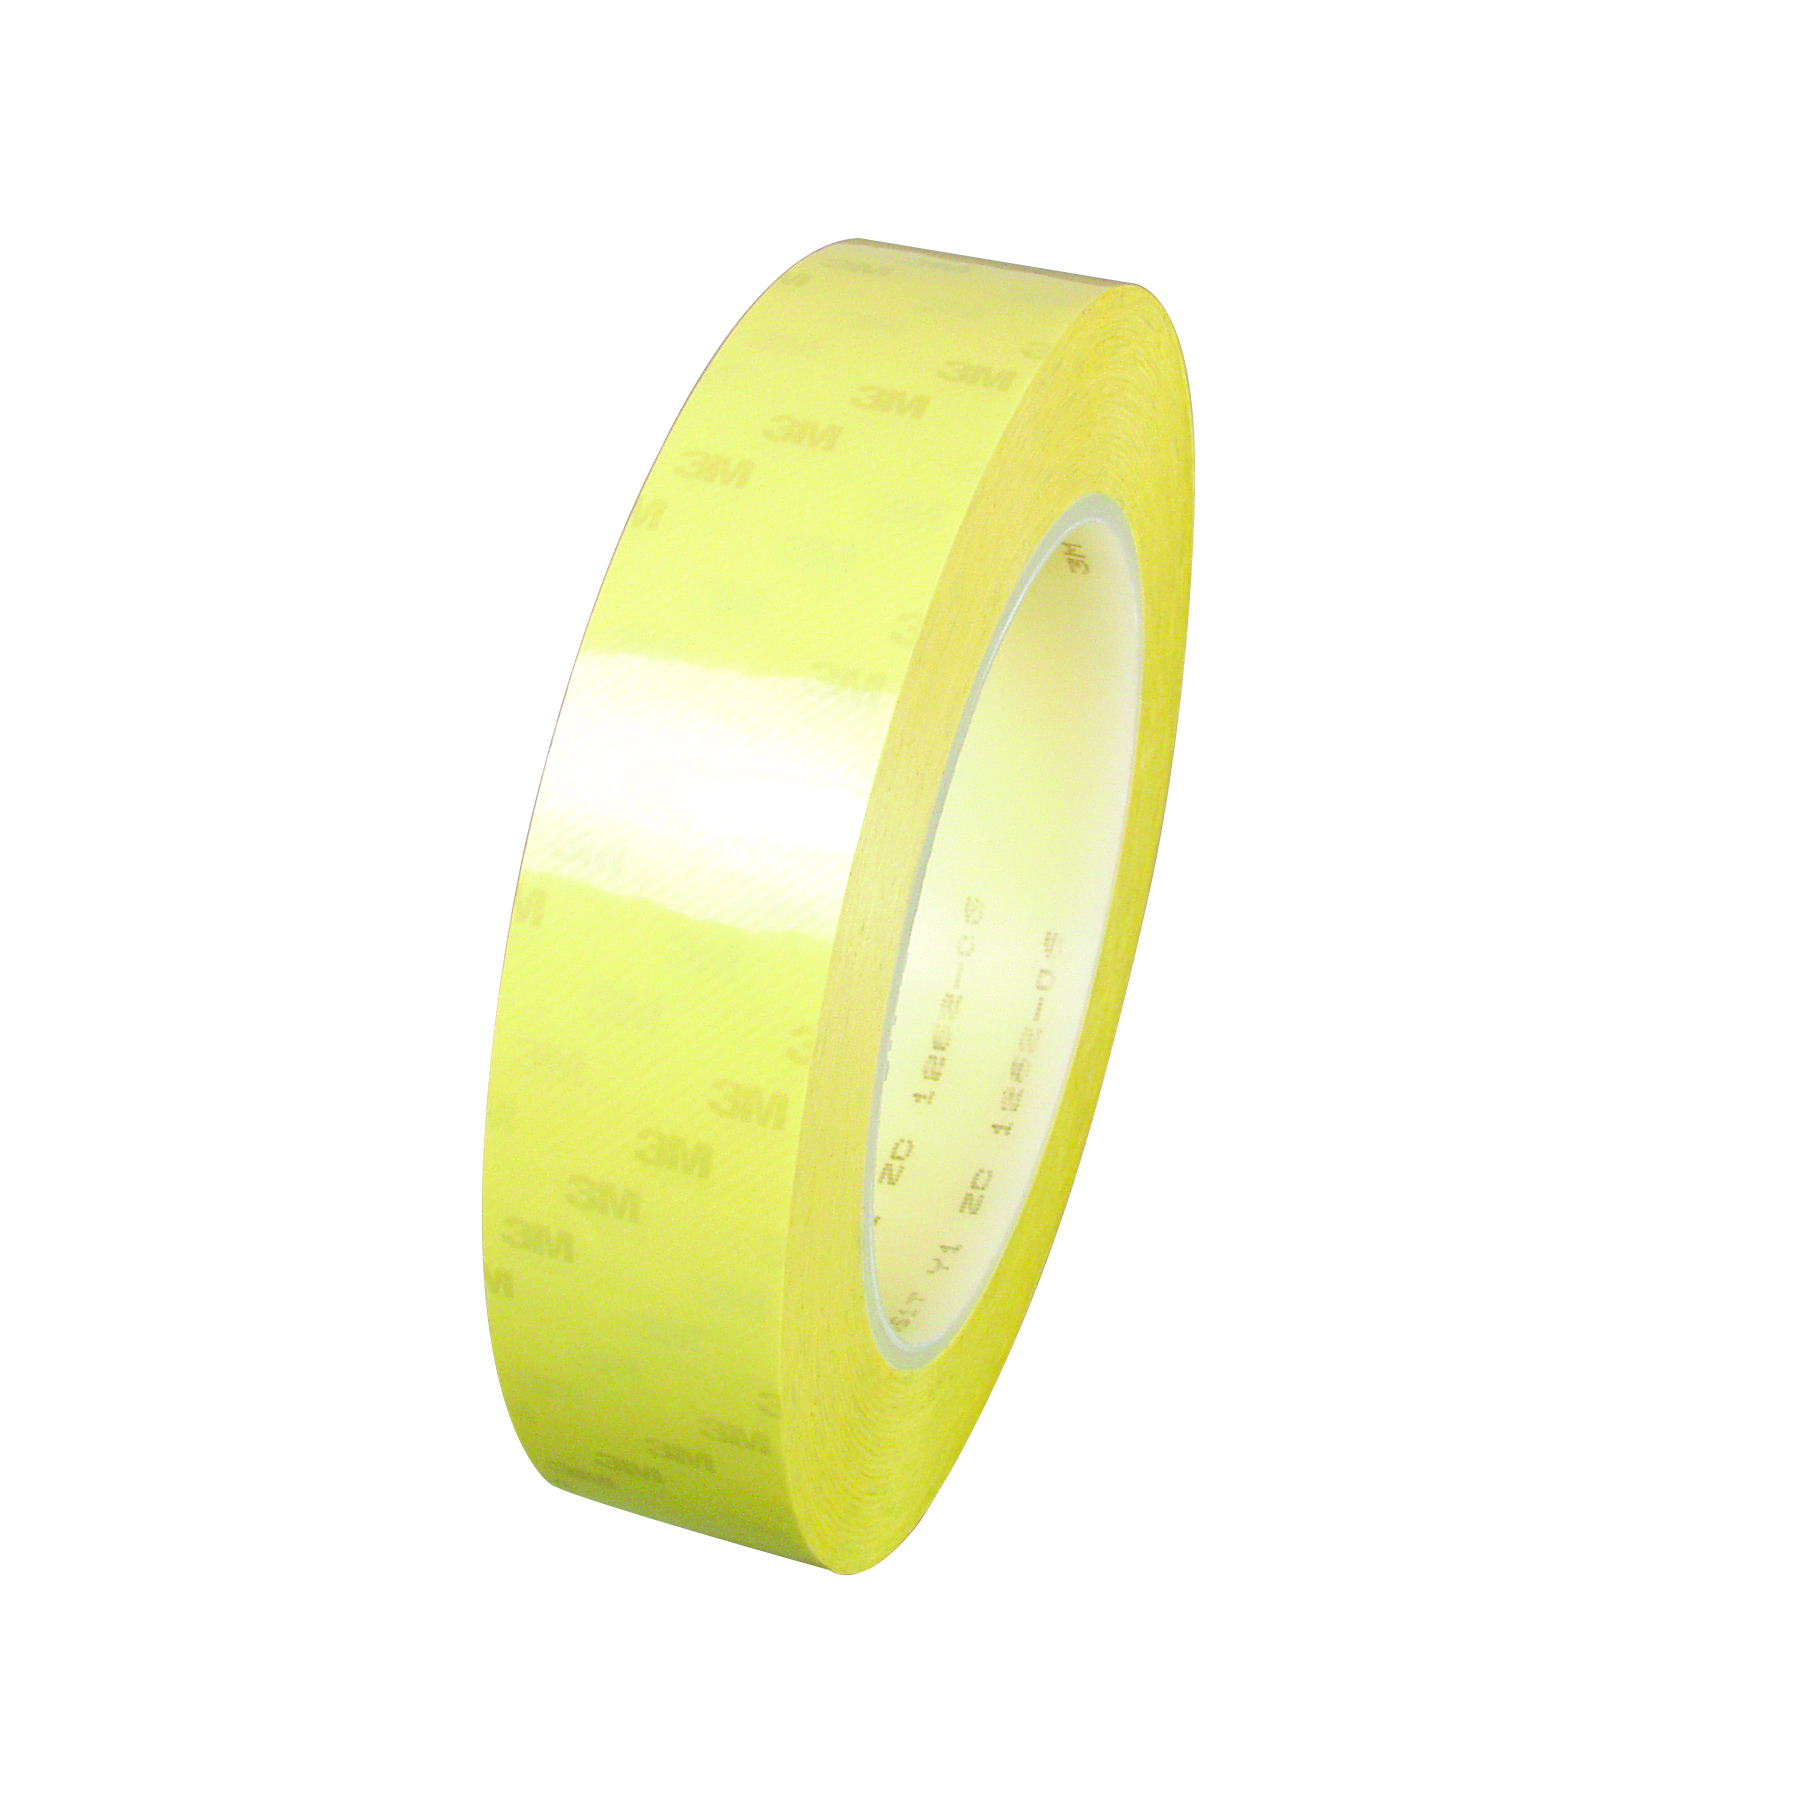 https://www.e-aircraftsupply.com/ItemImages/48/7000133148_3M_Polyester_Film_Electrical_Tape_56.jpg